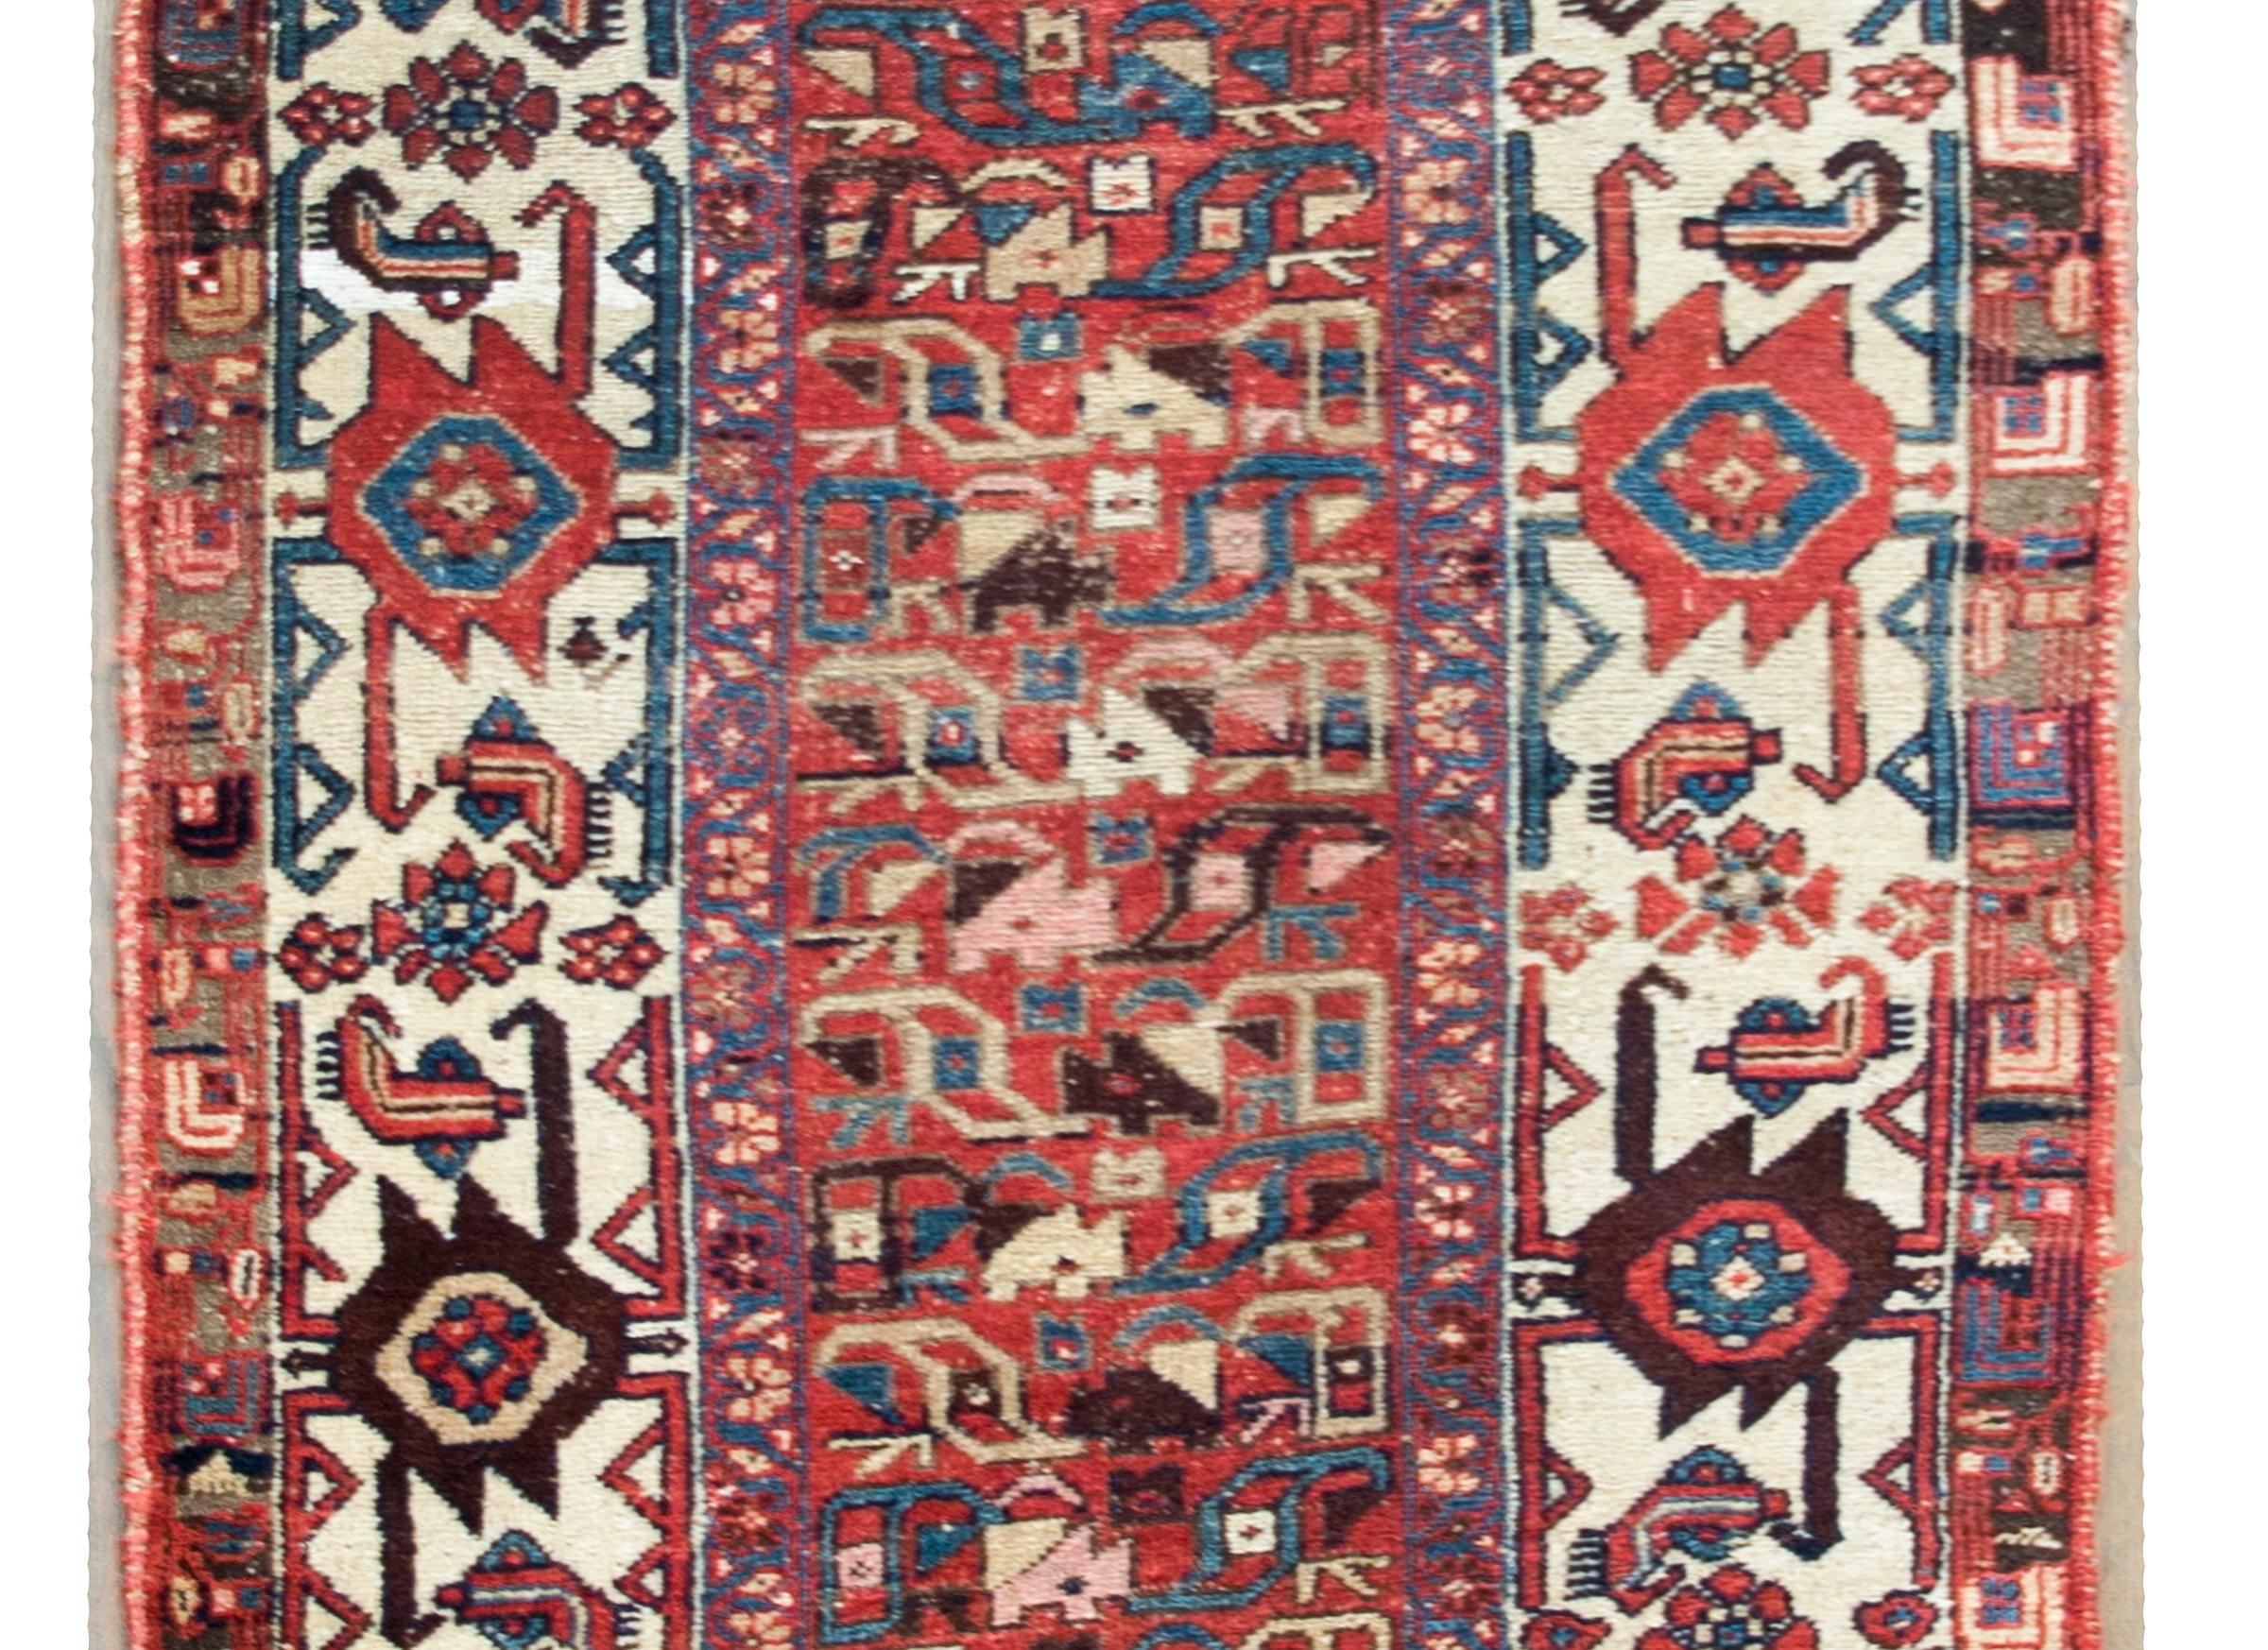 An incredible late 19th century Persian Azari runner with the most wonderful tribal pattern with a central field of all-over stylized flowers and scrolling vines, surrounded by an incredible complex border with more large-scale stylized flowers and